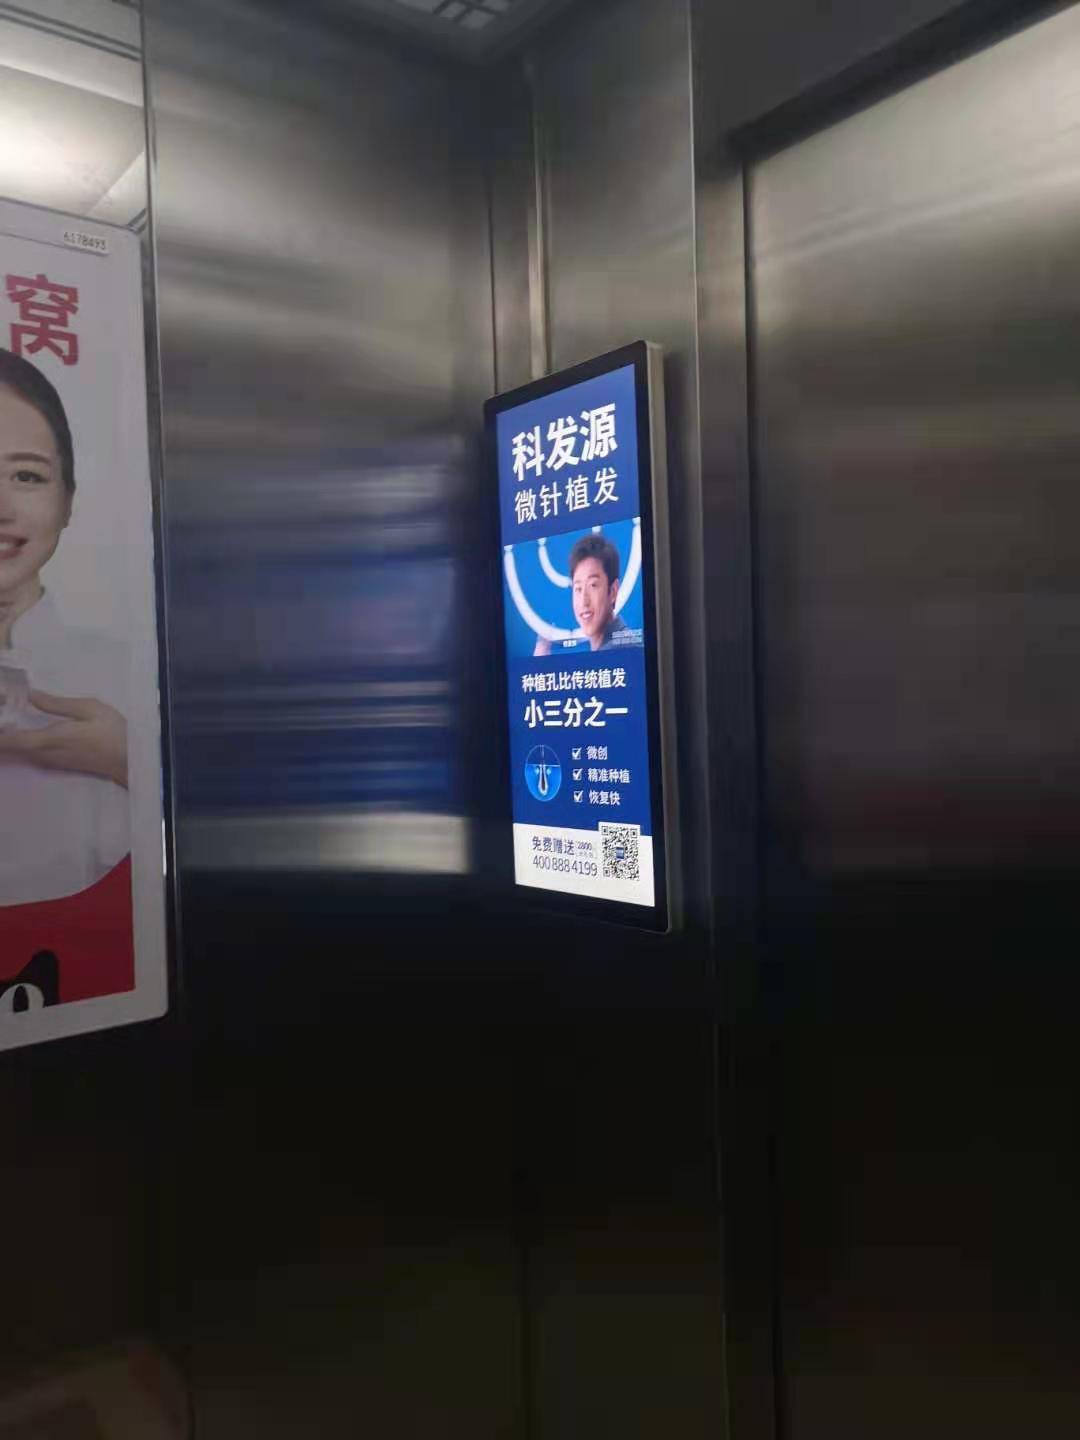 How can elevator ads quickly attract users’ attention?